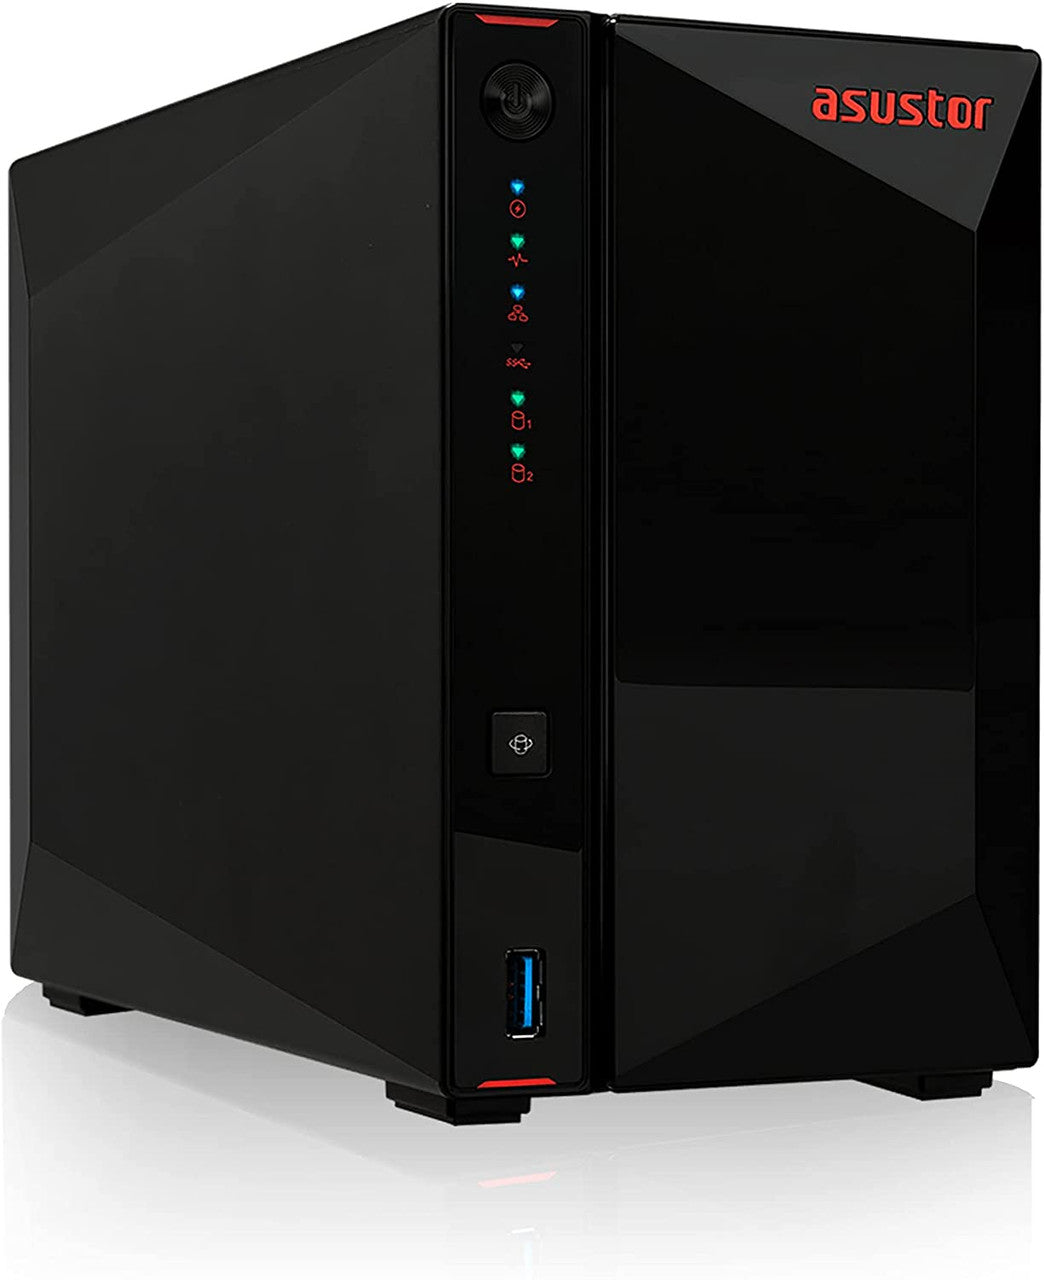 Asustor AS5202T 2-Bay Nimbustor 2 NAS with 2GB RAM and 28TB (2 x 14TB) Western Digital RED PRO Drives Fully Assembled and Tested